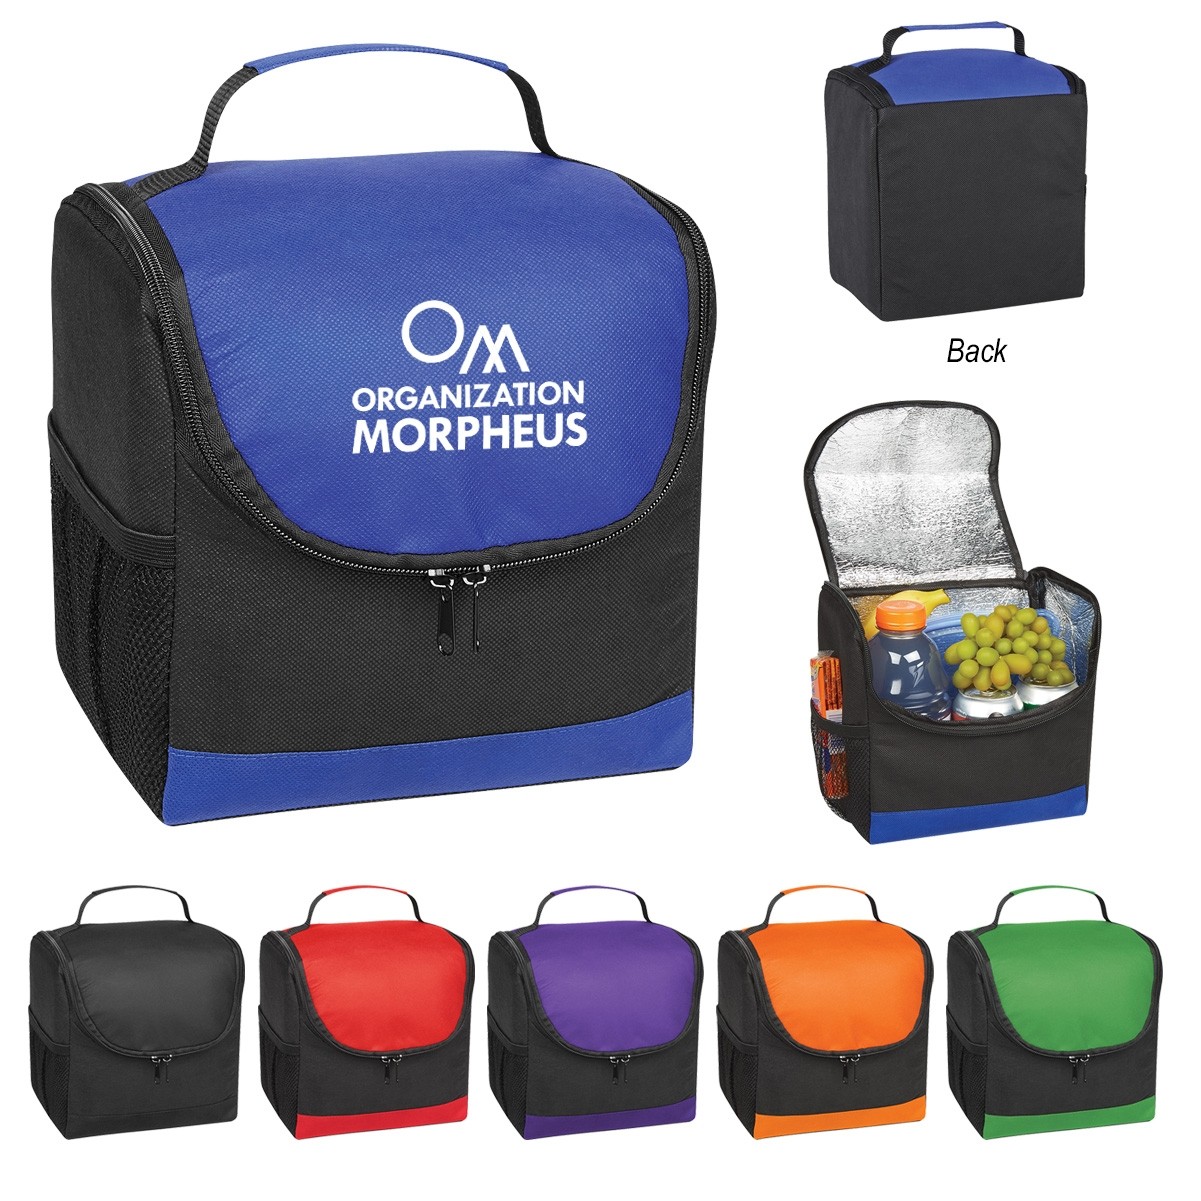 Thrifty Non-Woven Lunch Cooler Bag